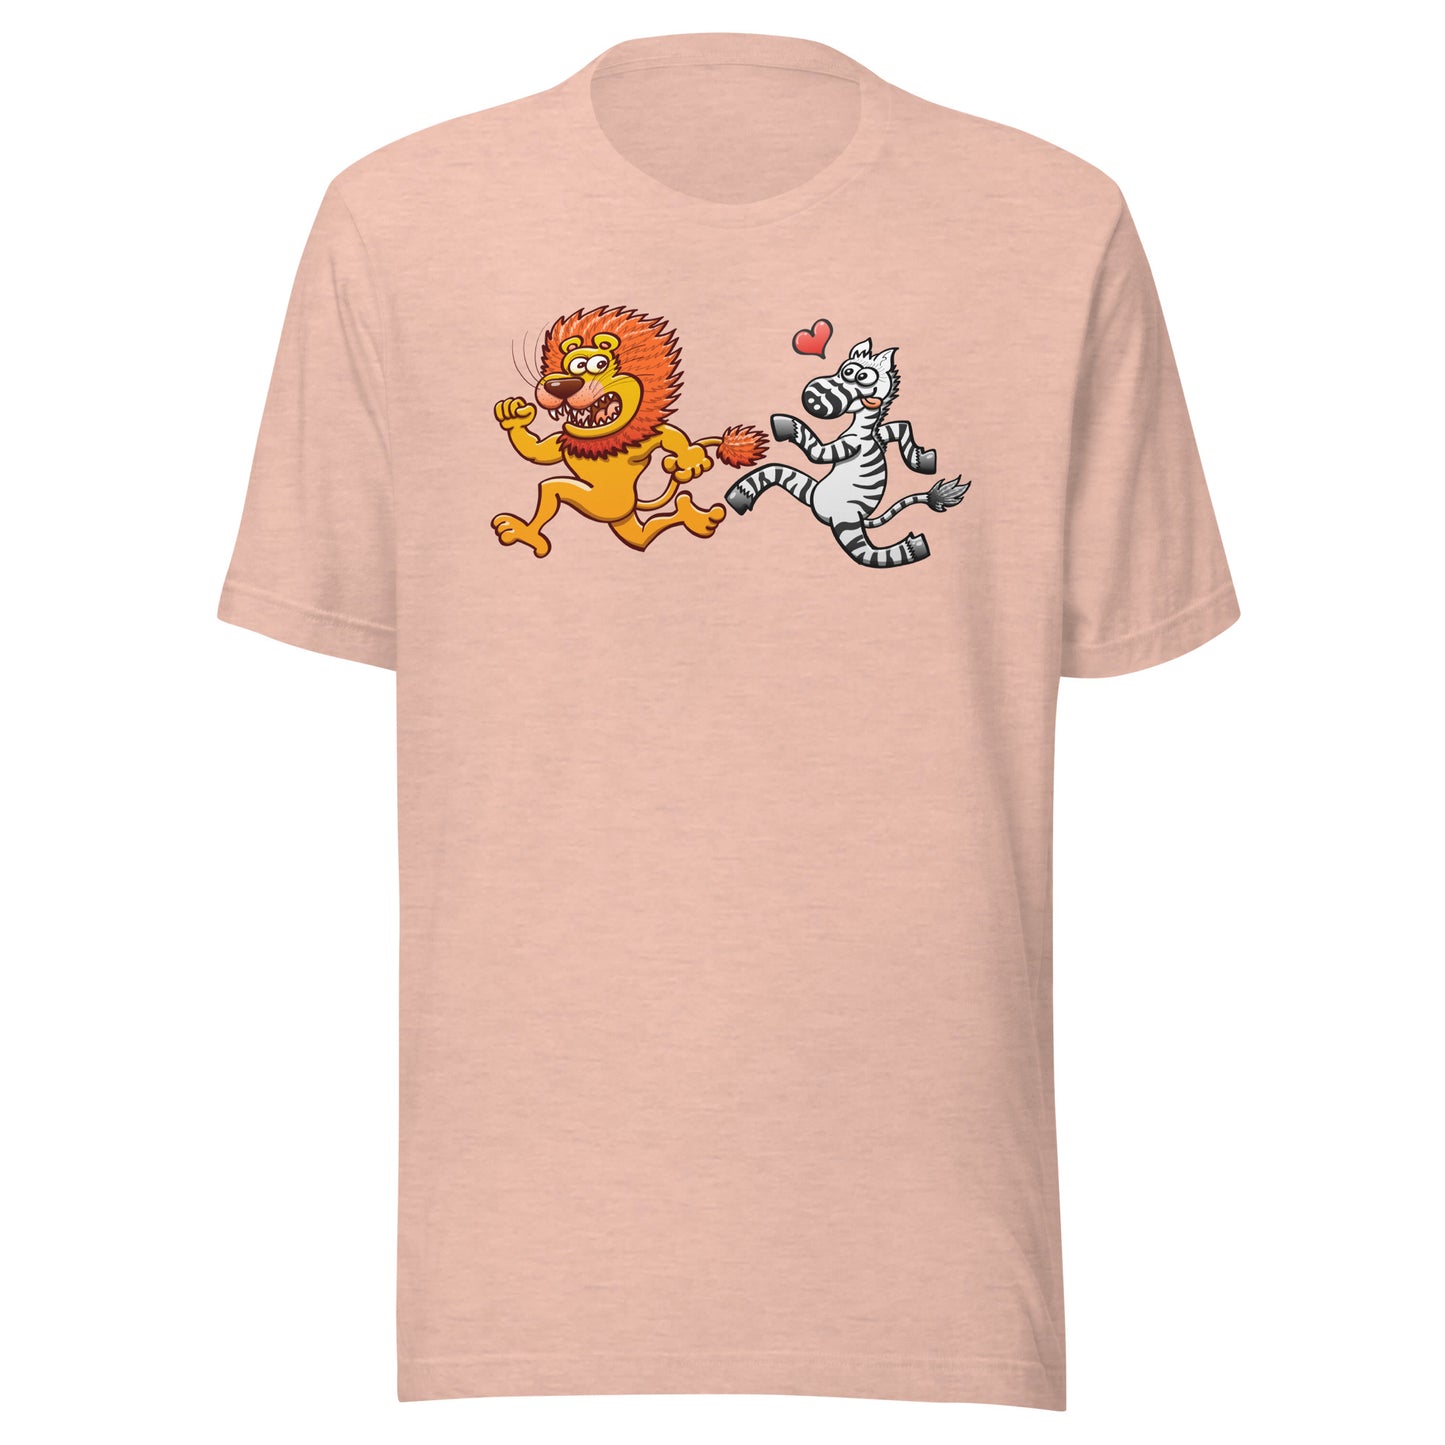 Wild zebra in love runs after a scared lion Unisex t-shirt. Heather prism peach color. Front view